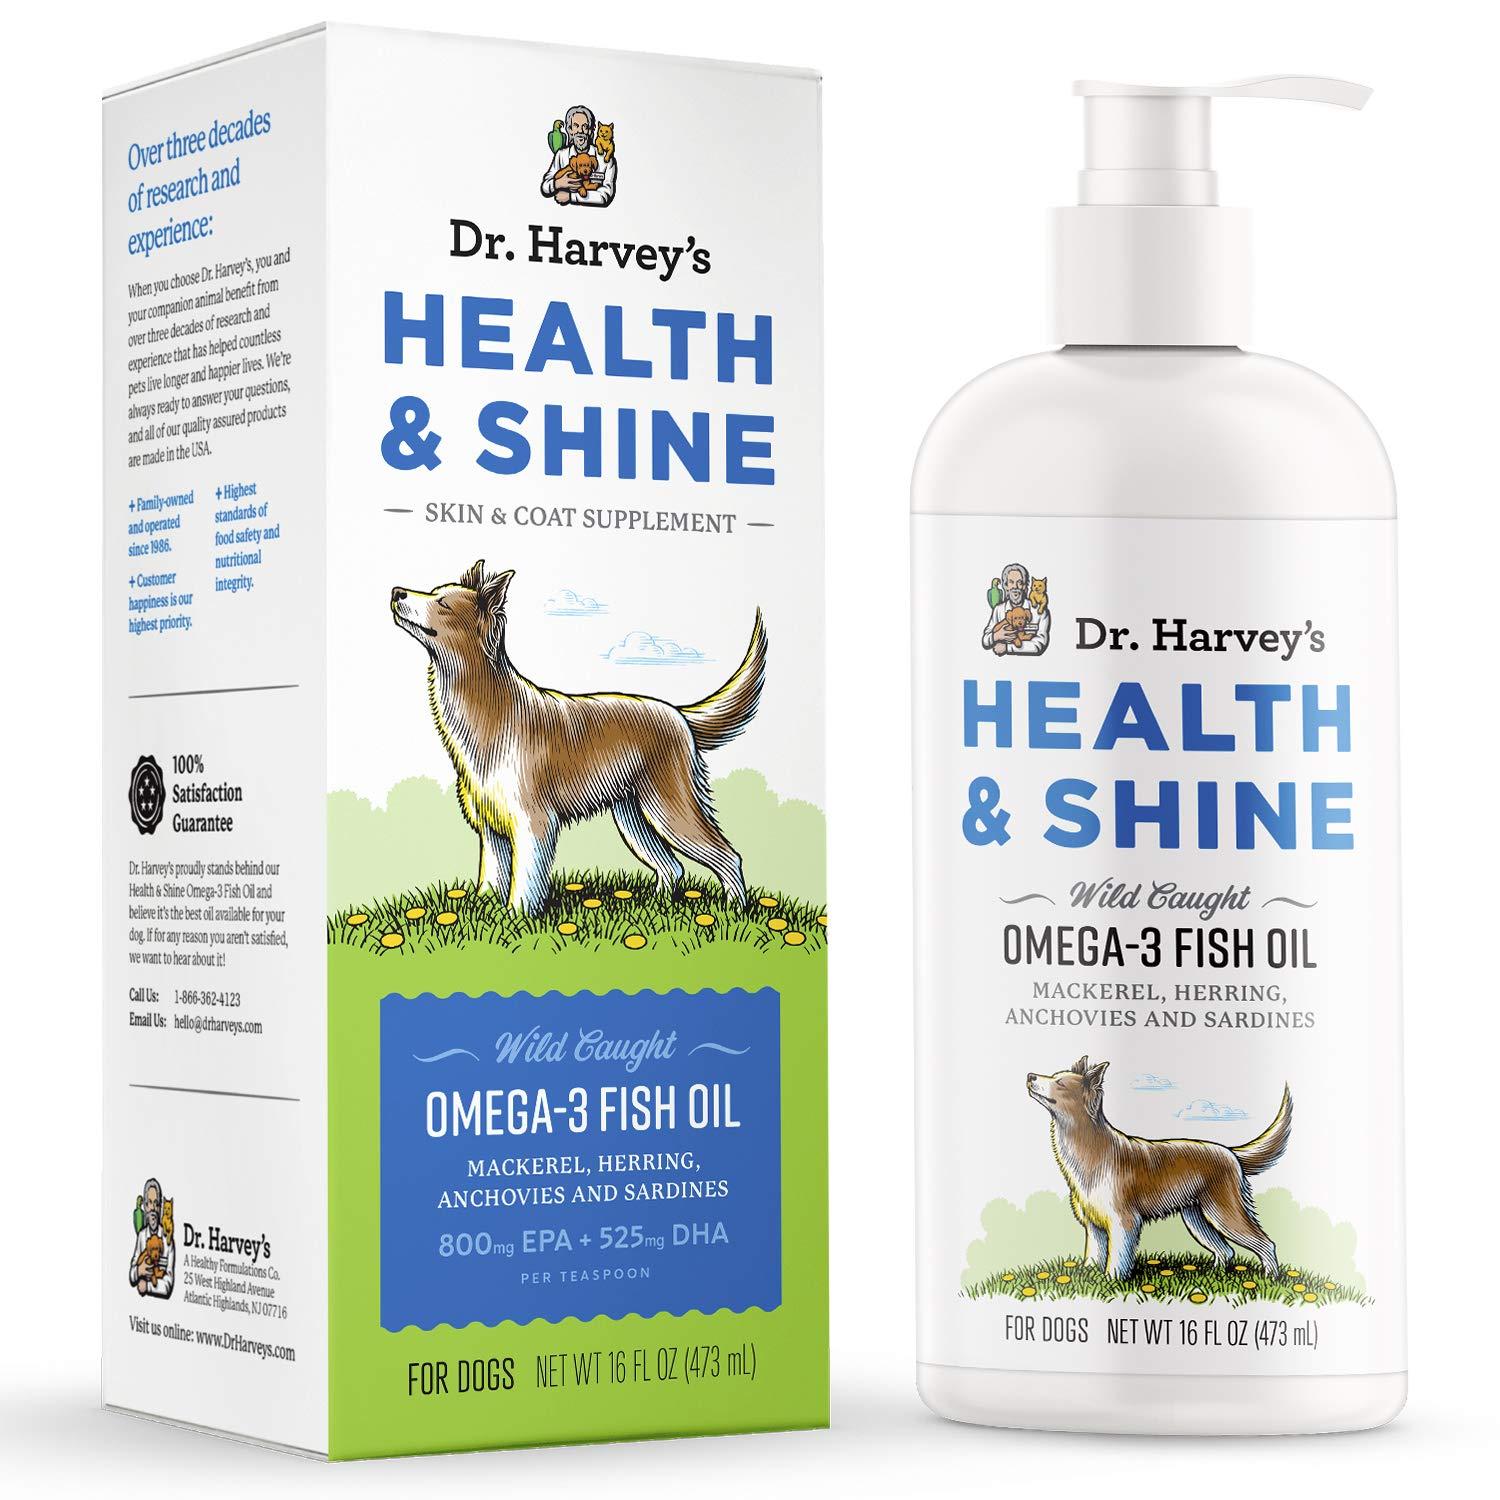 Dr. Harvey\\\'s Health & Shine Omega 3 Fish Oil for Dogs from Wild Caught Mackerel, Herring, Anchovies and Sardines - Supports Beautiful Fur, Strong Joints and Itchy Allergy Relief (16 FL OZ)